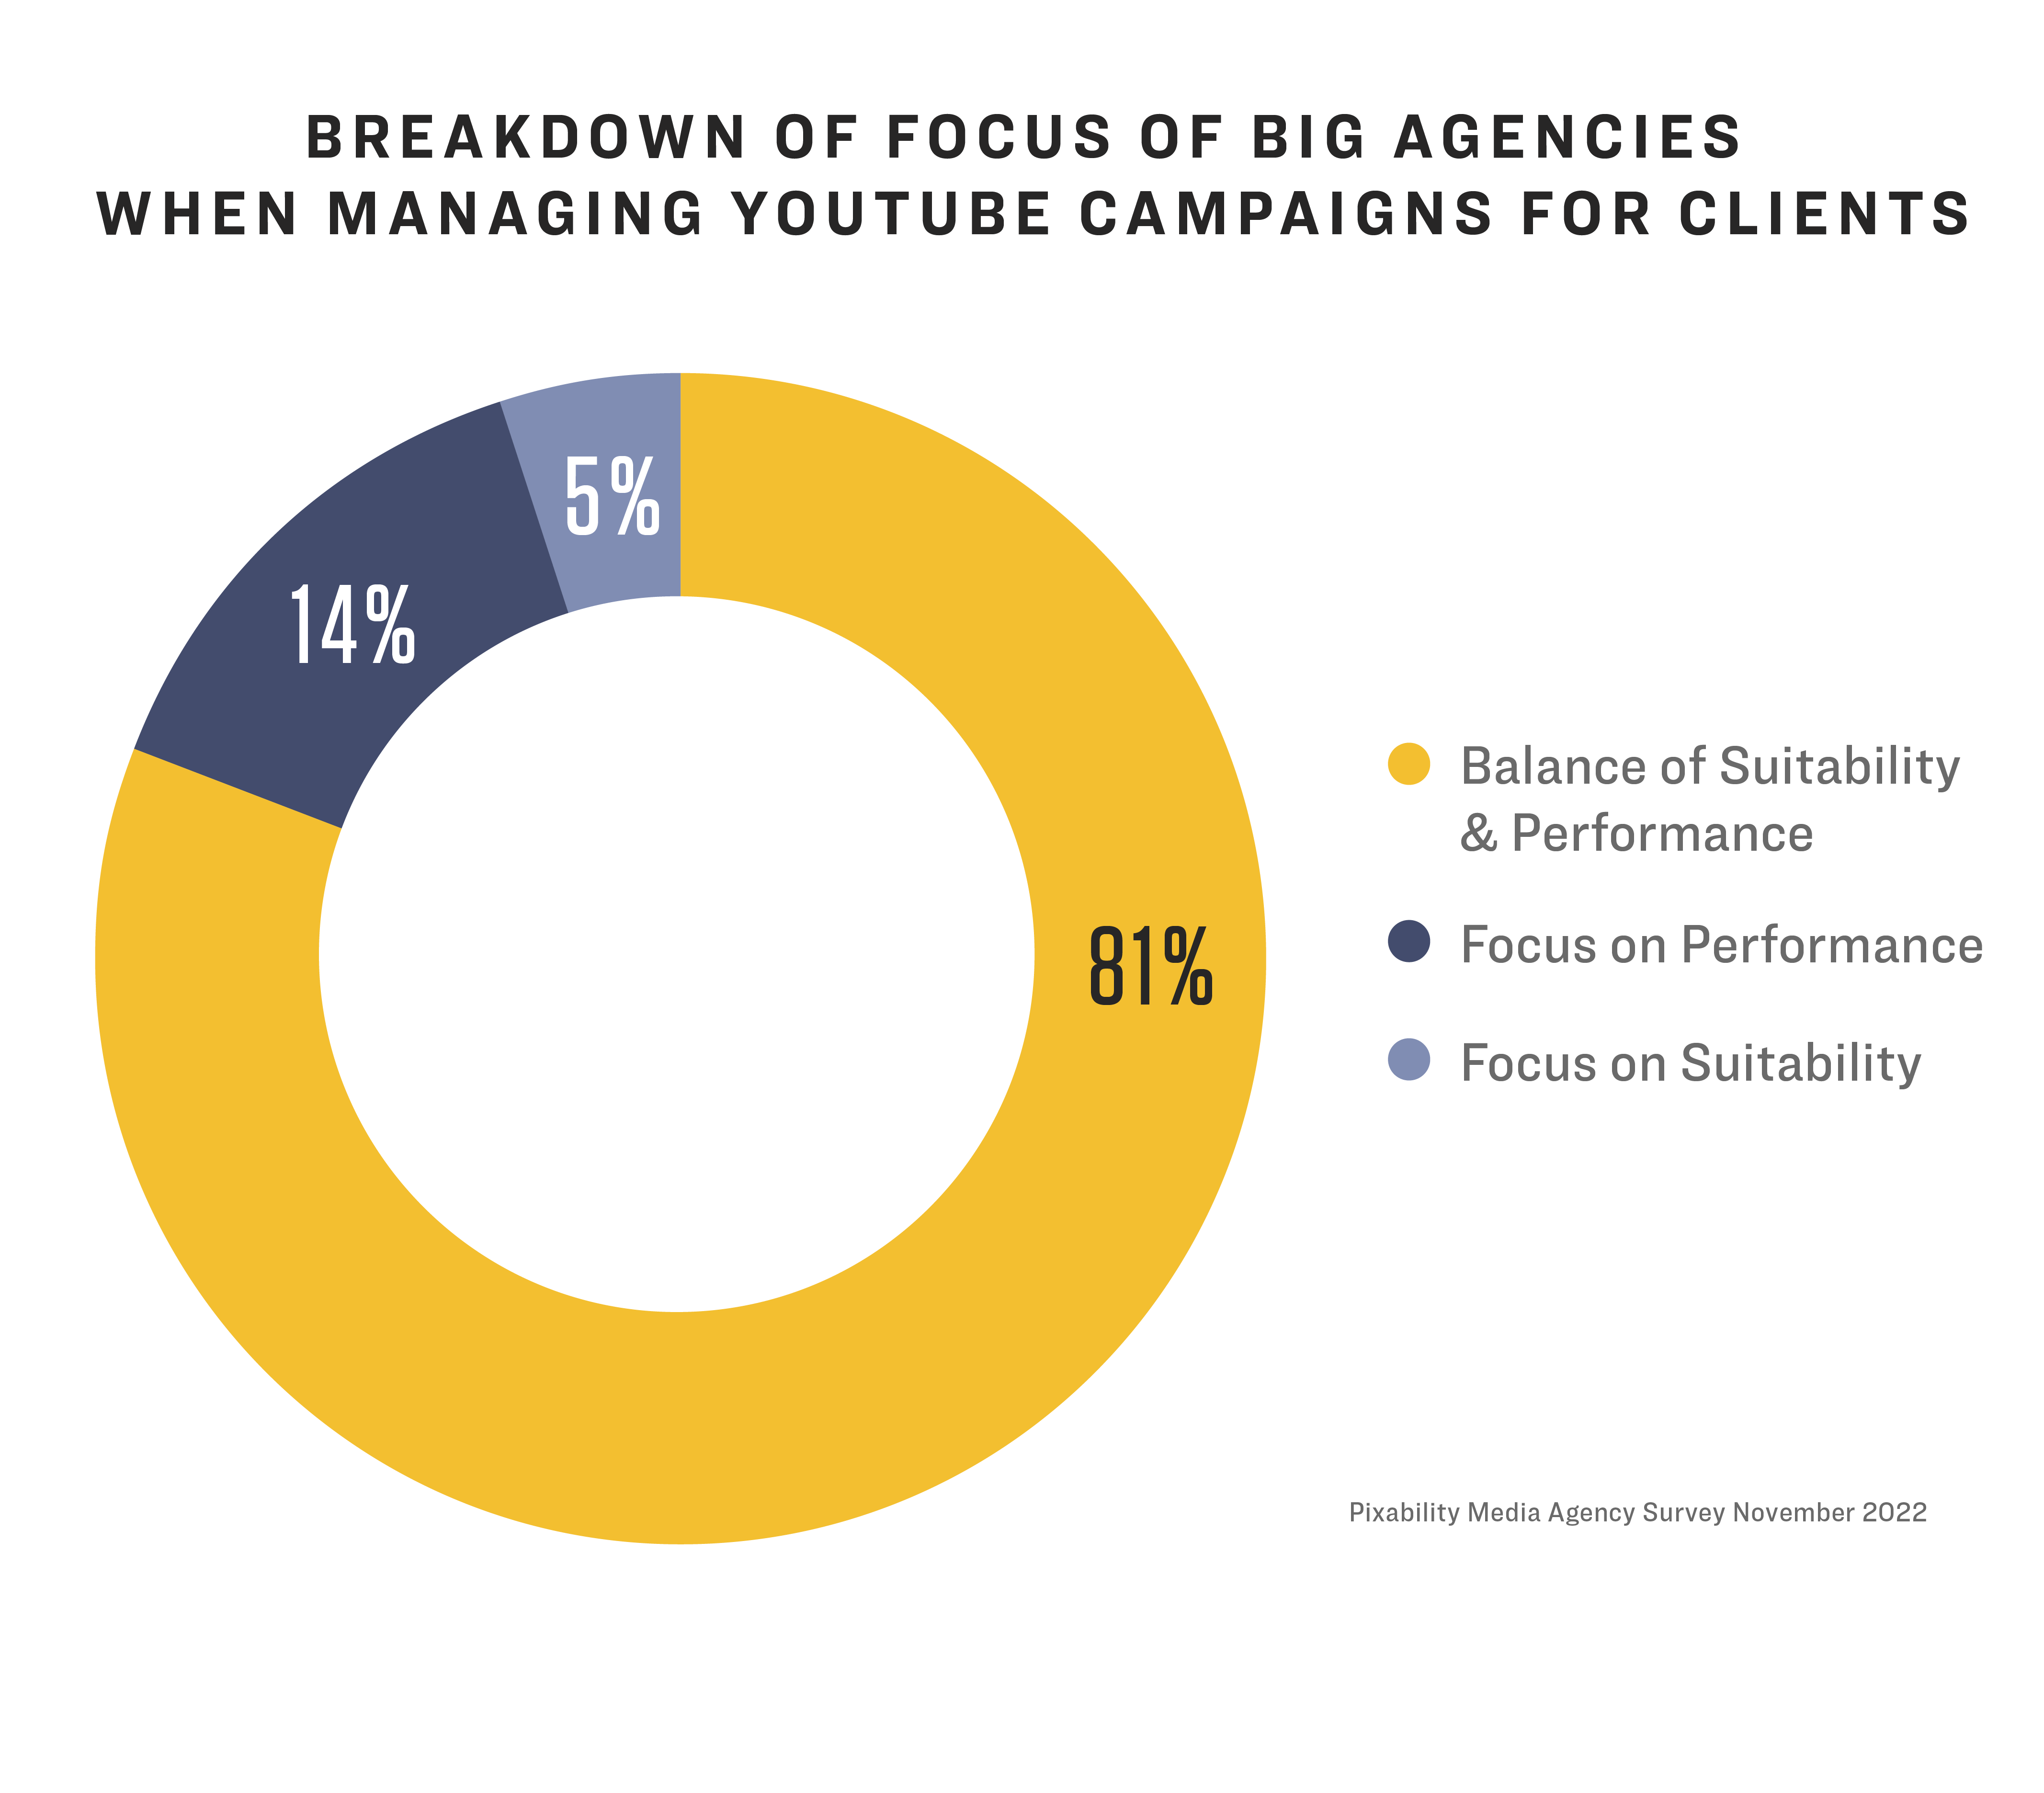 Pie chart showing a breakdown of focus of big agencies when managing YouTube campaigns for clients